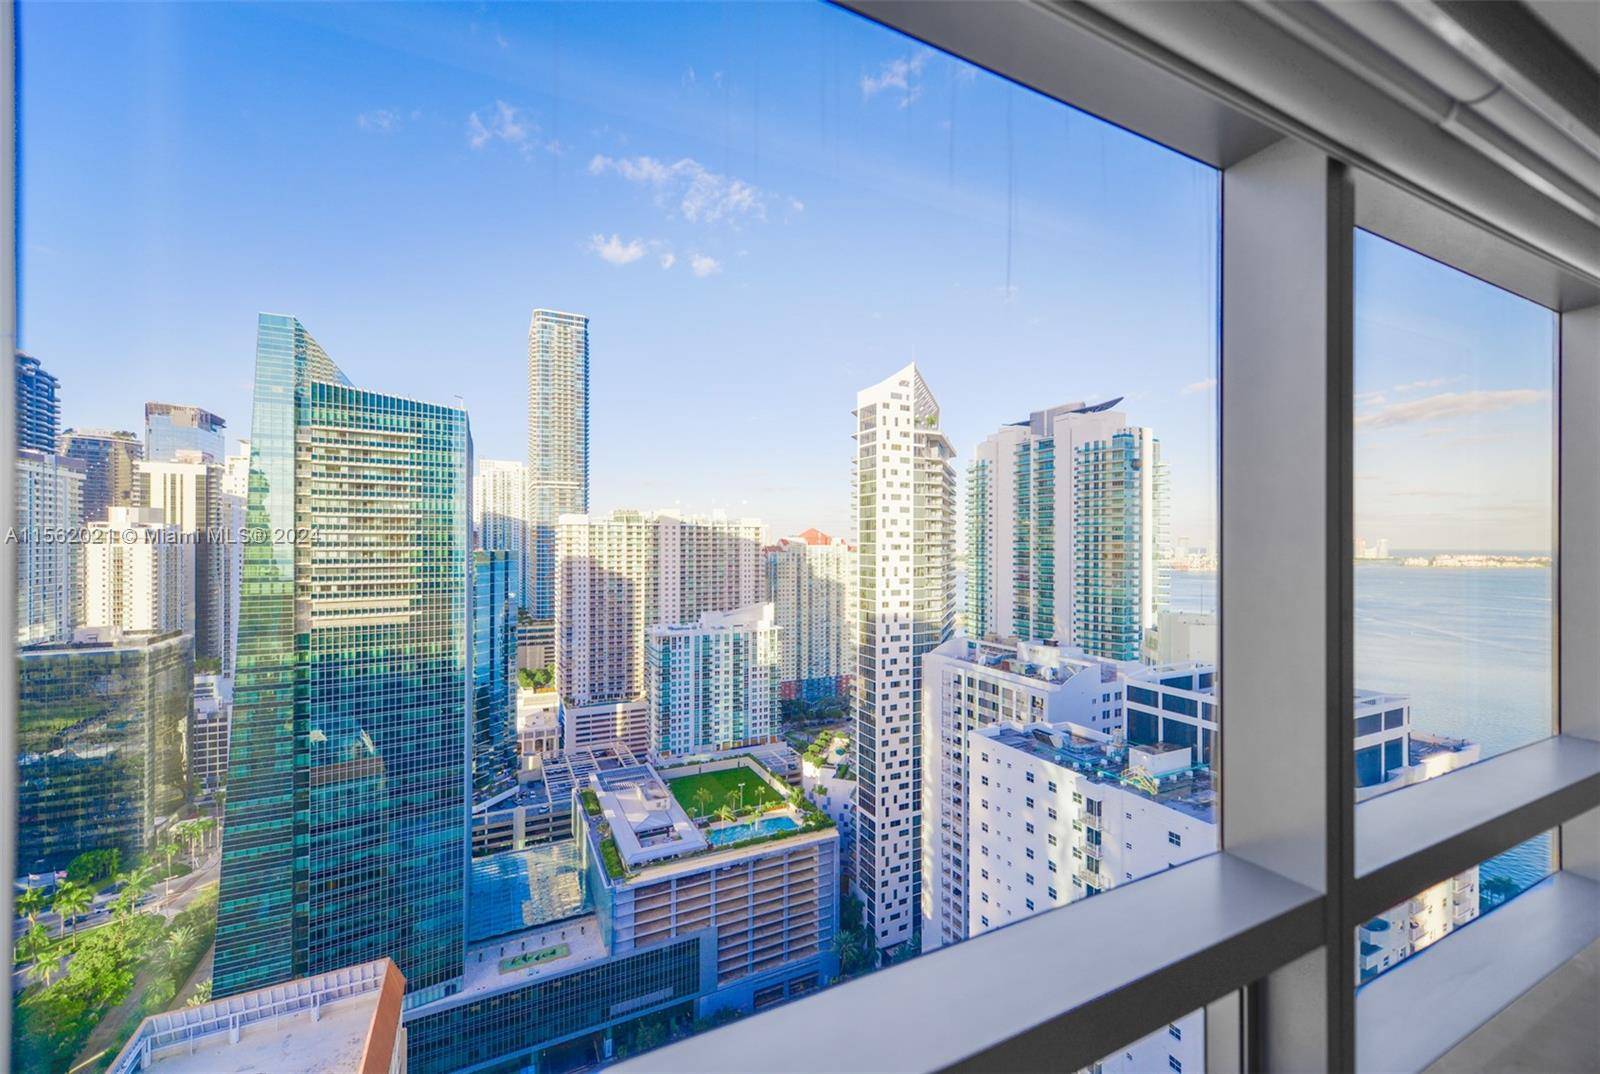 Escape to the exclusive Four Seasons Brickell this summer, where luxury meets unparalleled service.